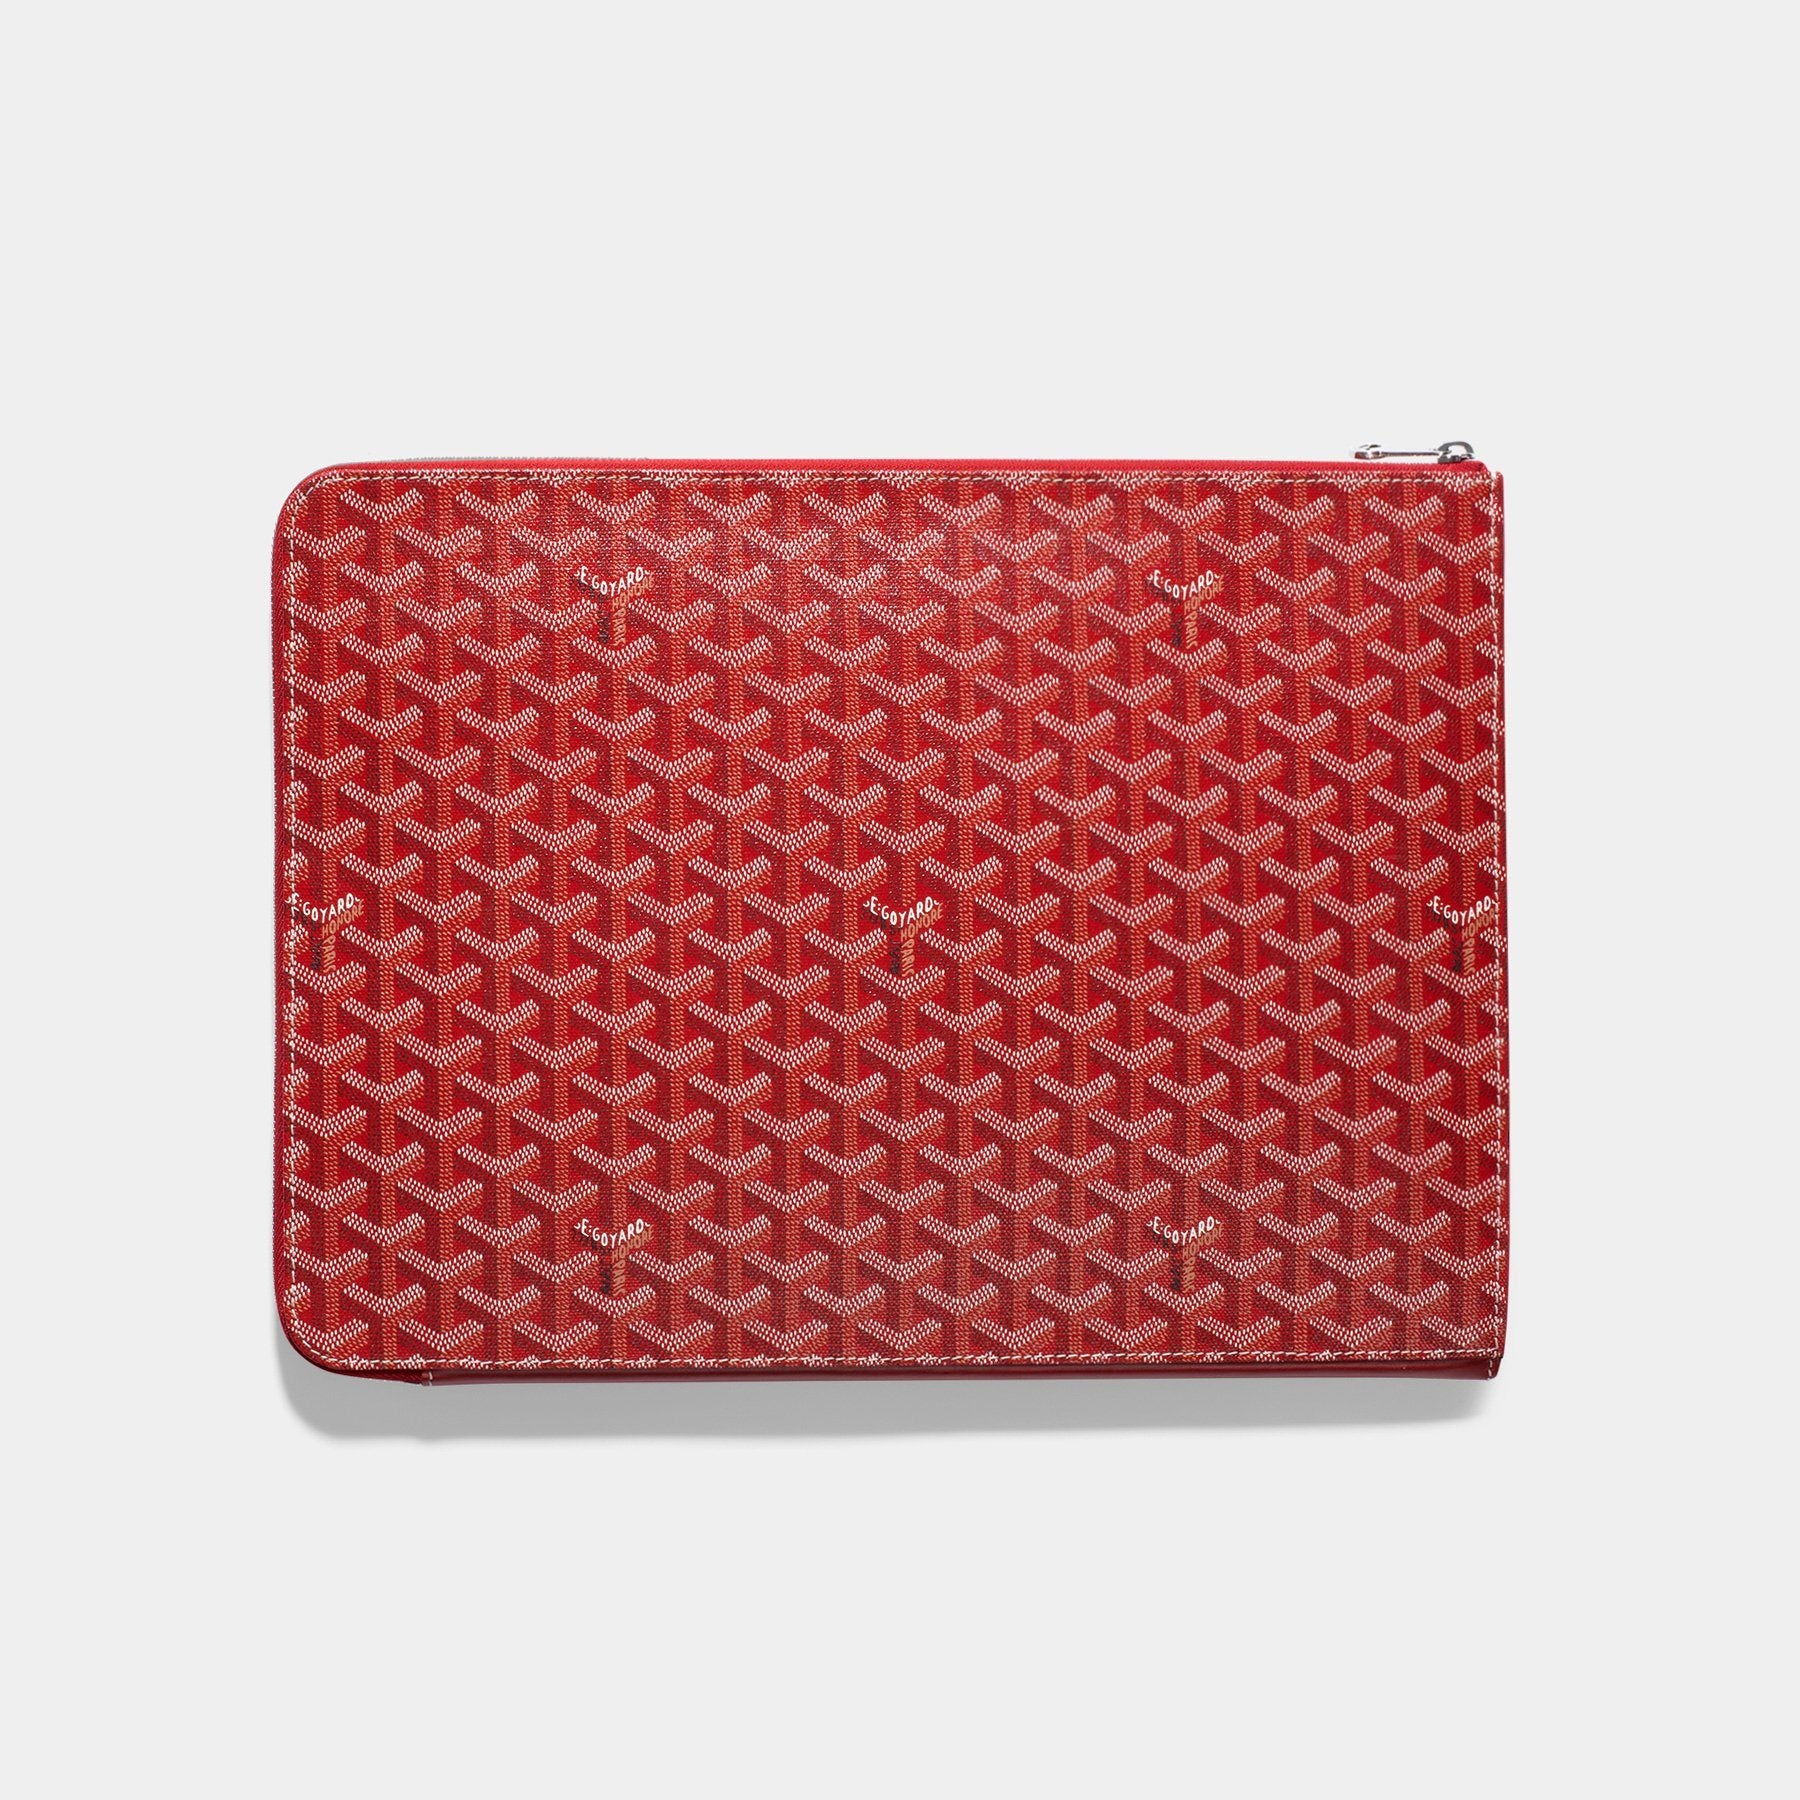 Goyard, Accessories, Goyard Logo Canvas Zipper Wallet With Original Box  And Papers Authentic